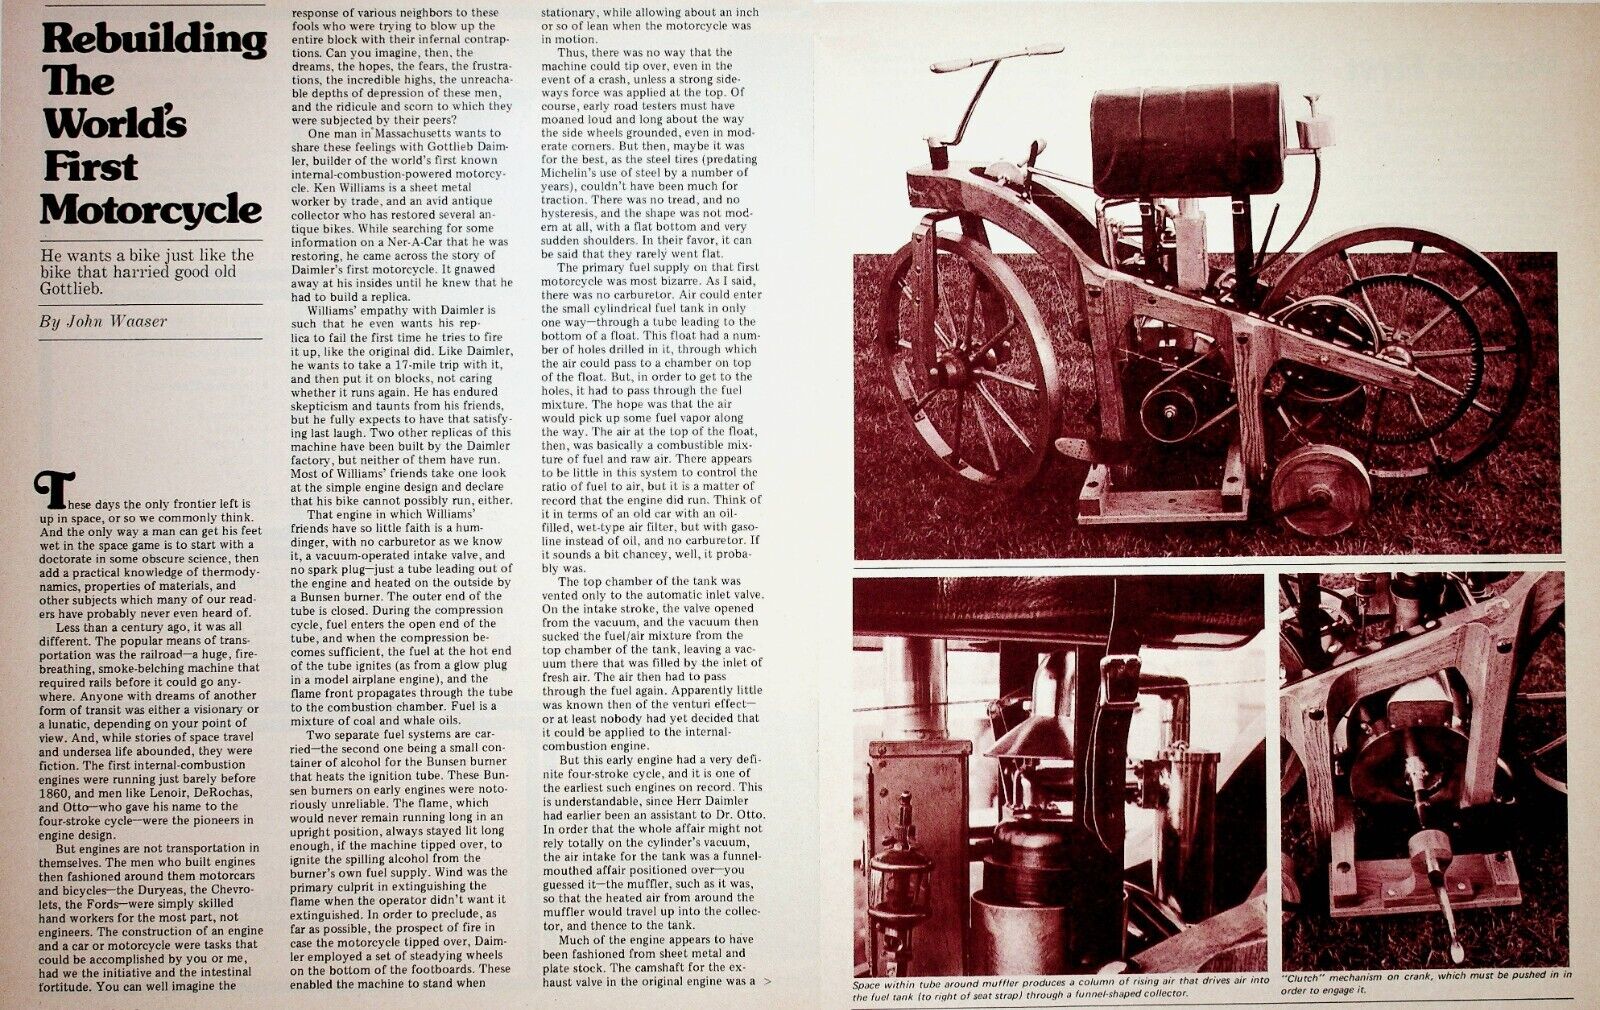 1974 Worlds First Motorcycle Rebuild - 4-Page Vintage Article